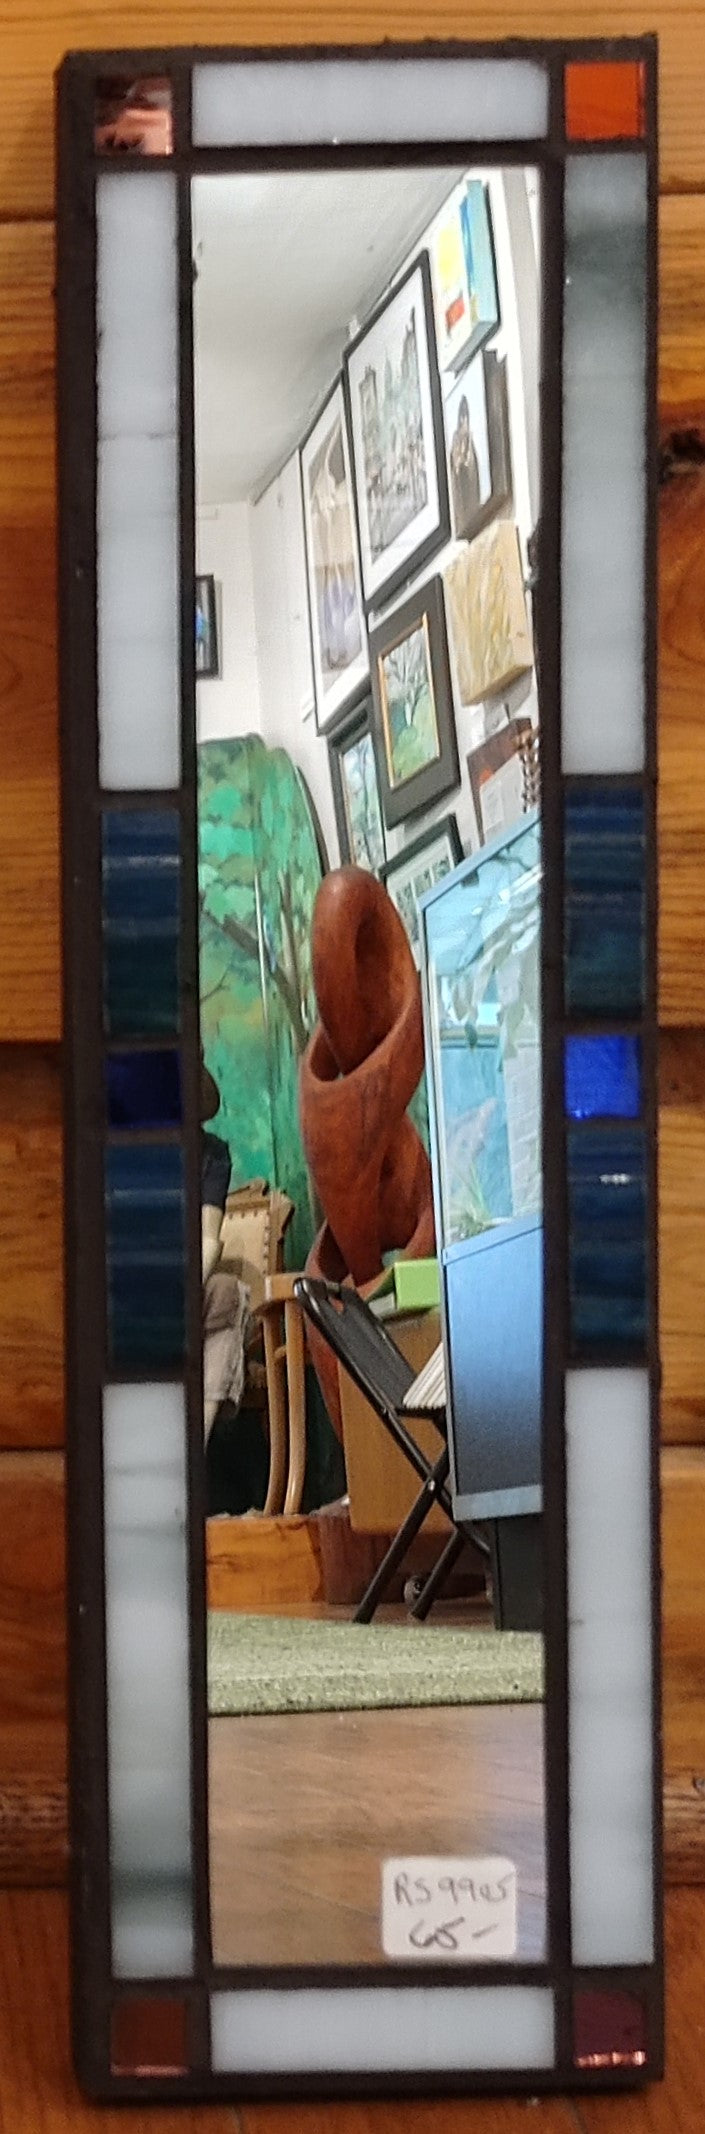 Stained Glass Mirror by Ron Schuster #05